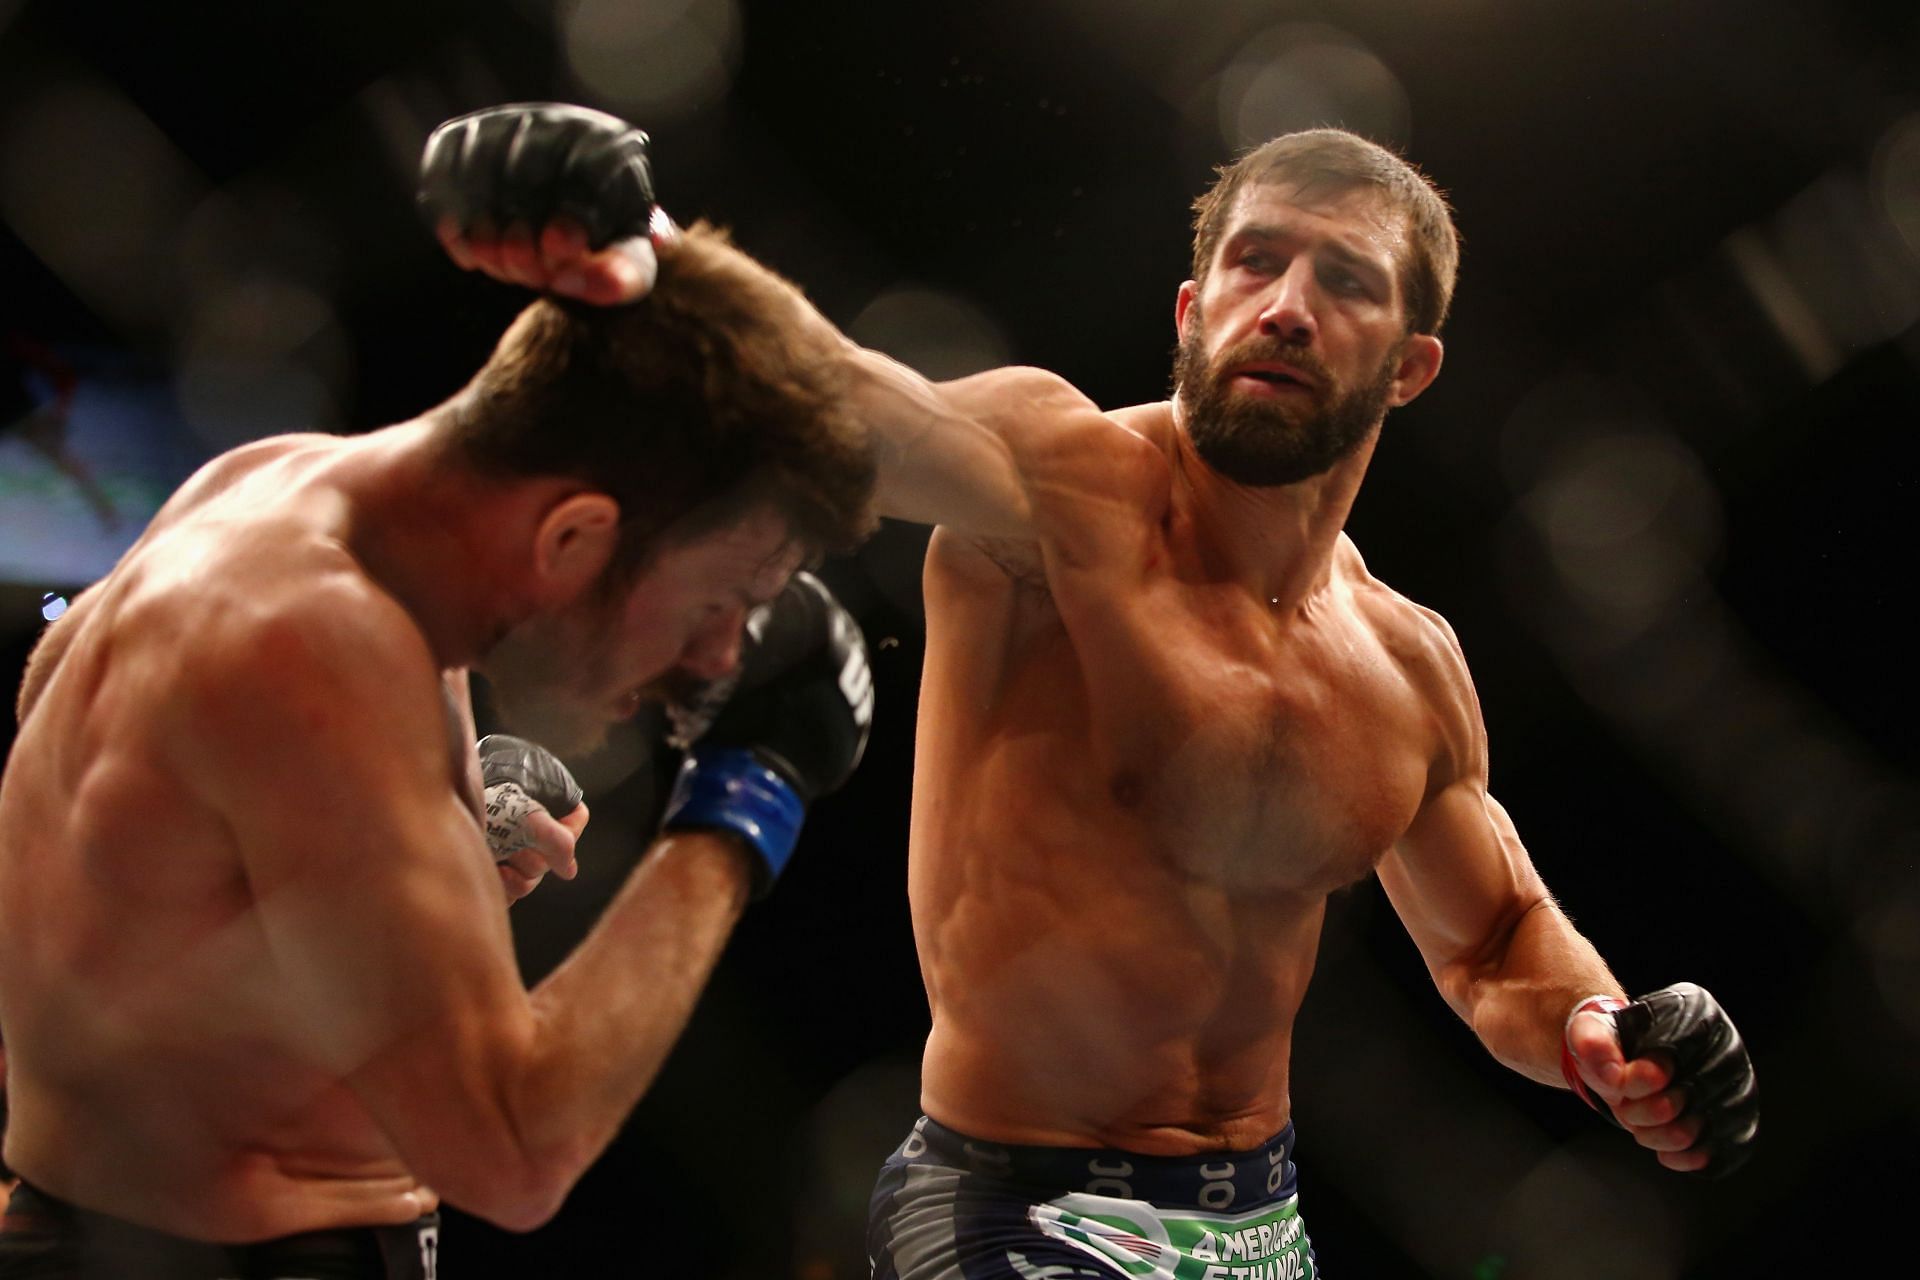 The series between Rockhold and Bisping finished at 1-1